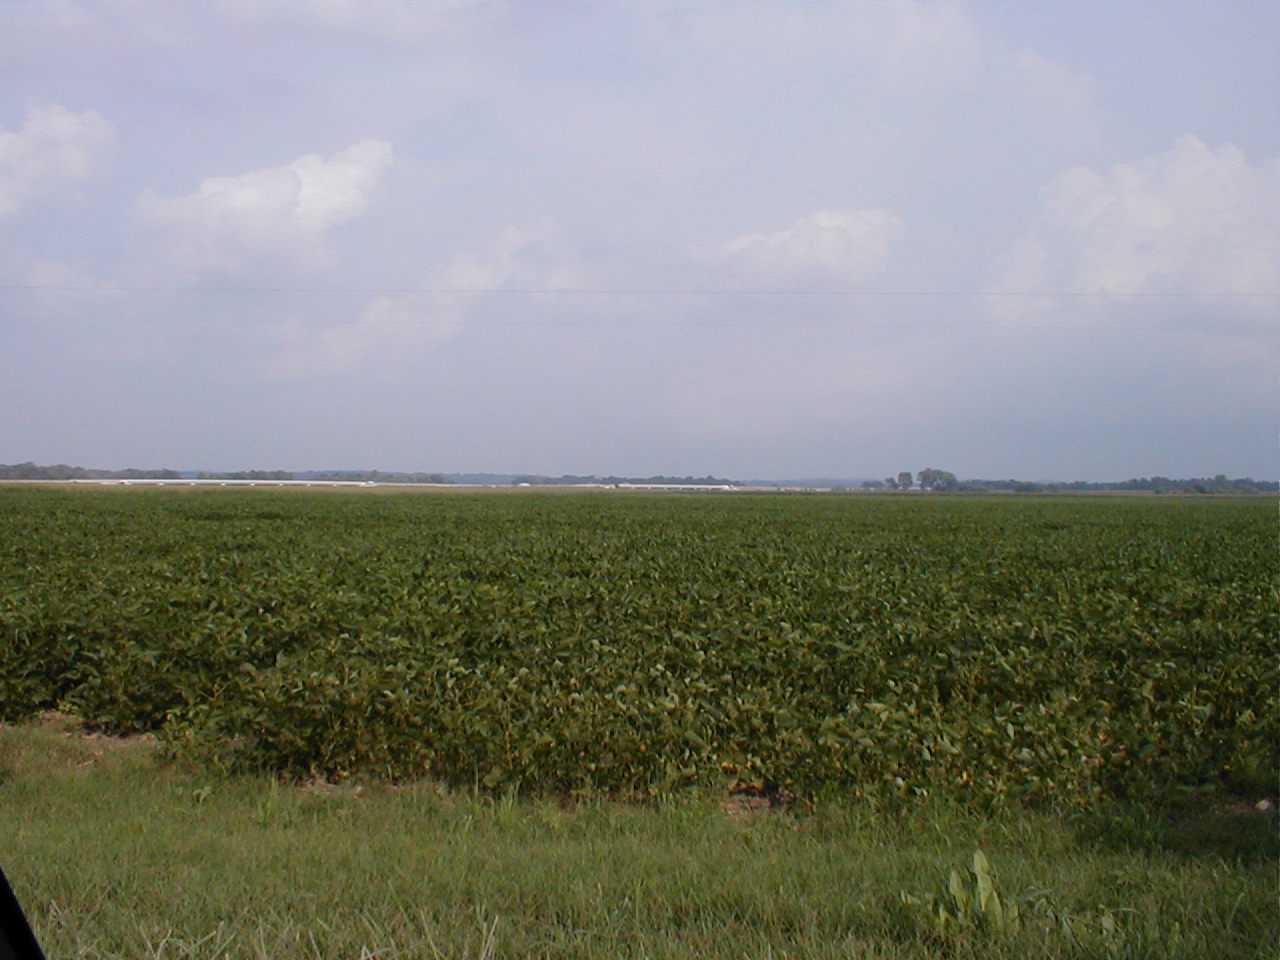 The Kentucky approach to the bridge is visible on the other side of the soybean field.